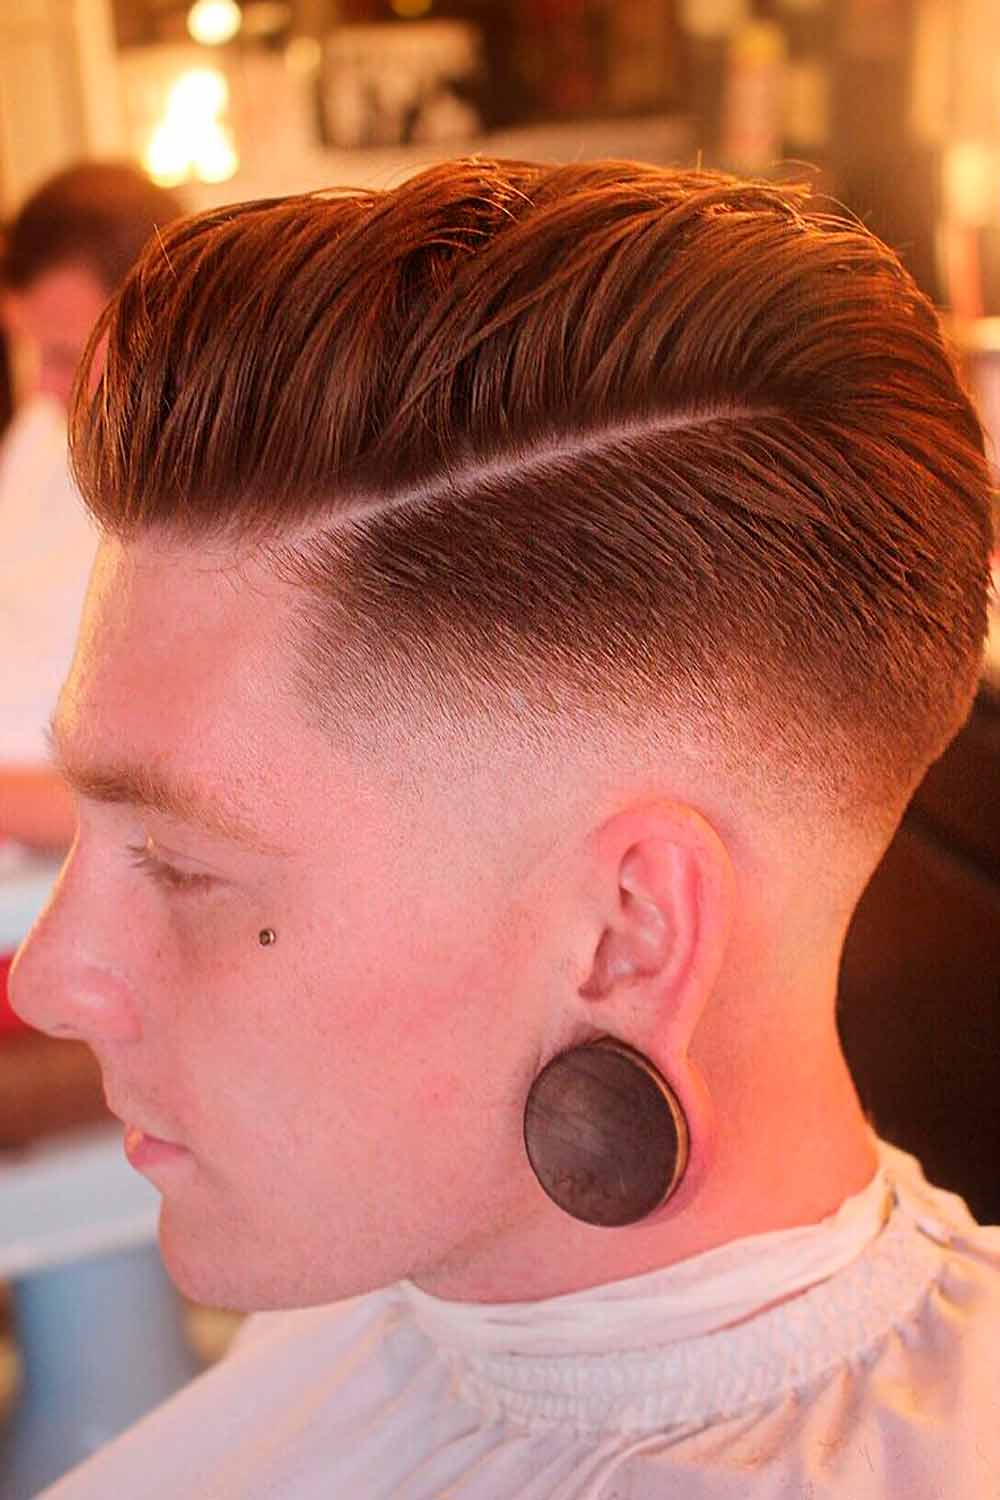 What Is A Mid Fade Haircut? #fadehaircut #midfade #fade